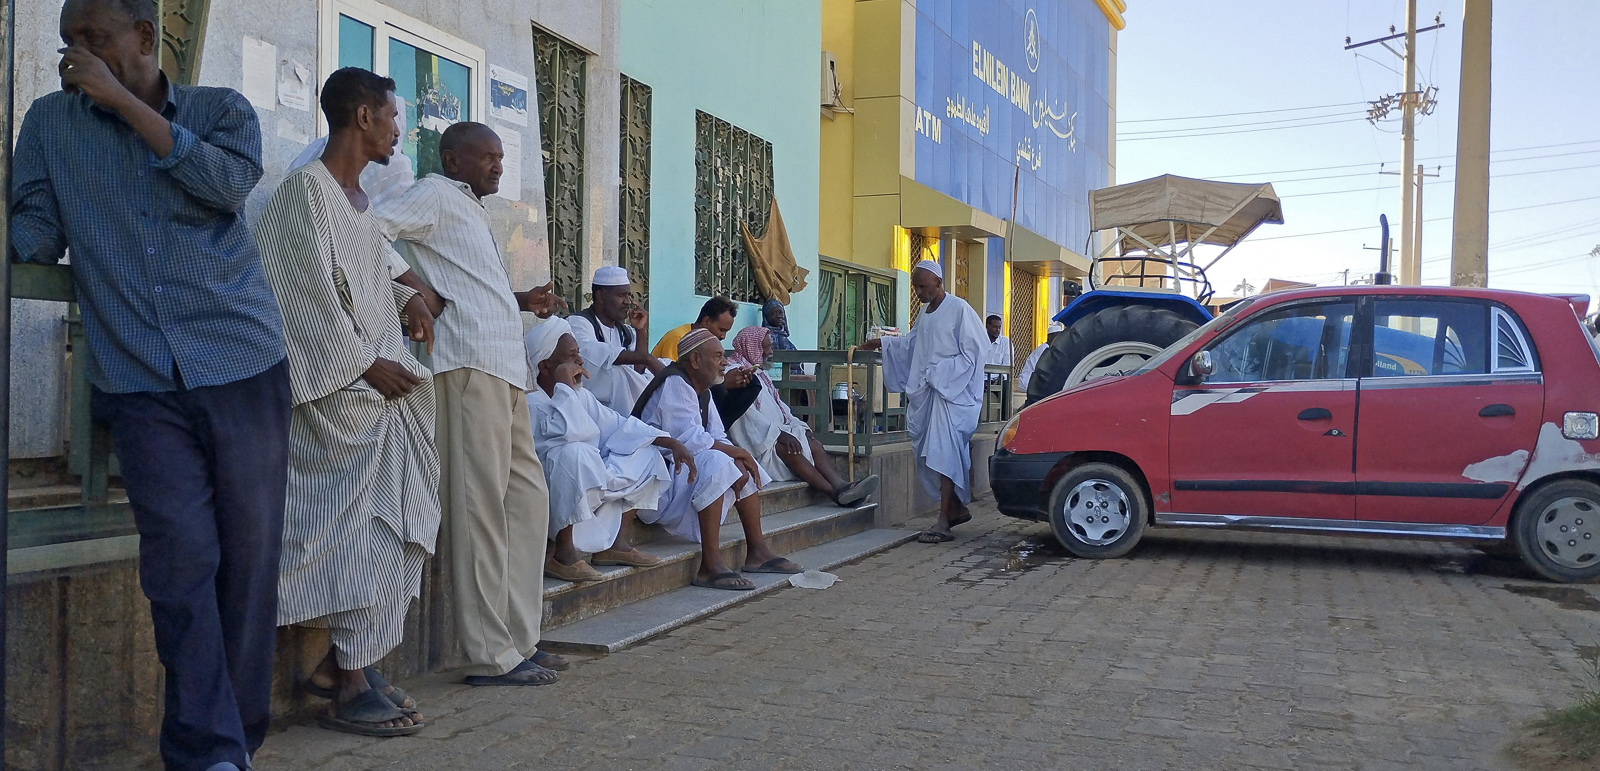 People queue outside Khartoum bank during Sudan conflict, 2 May 2023